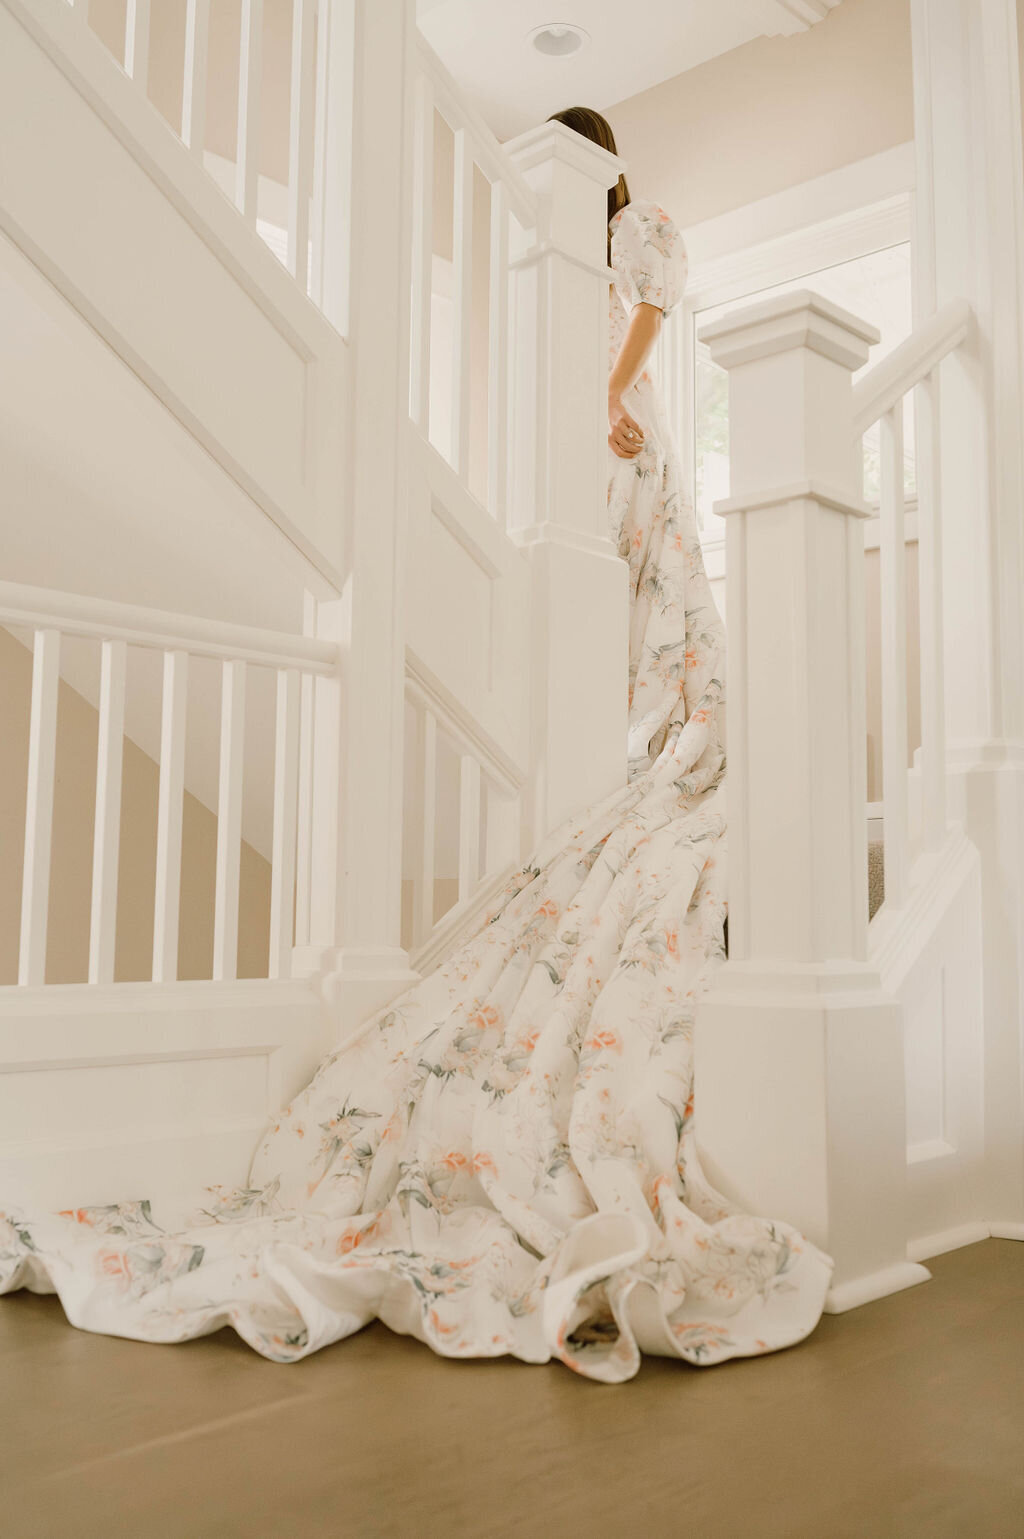 Bride wearing a floral printed wedding dress with a dramatic train walking up a flight of stairs